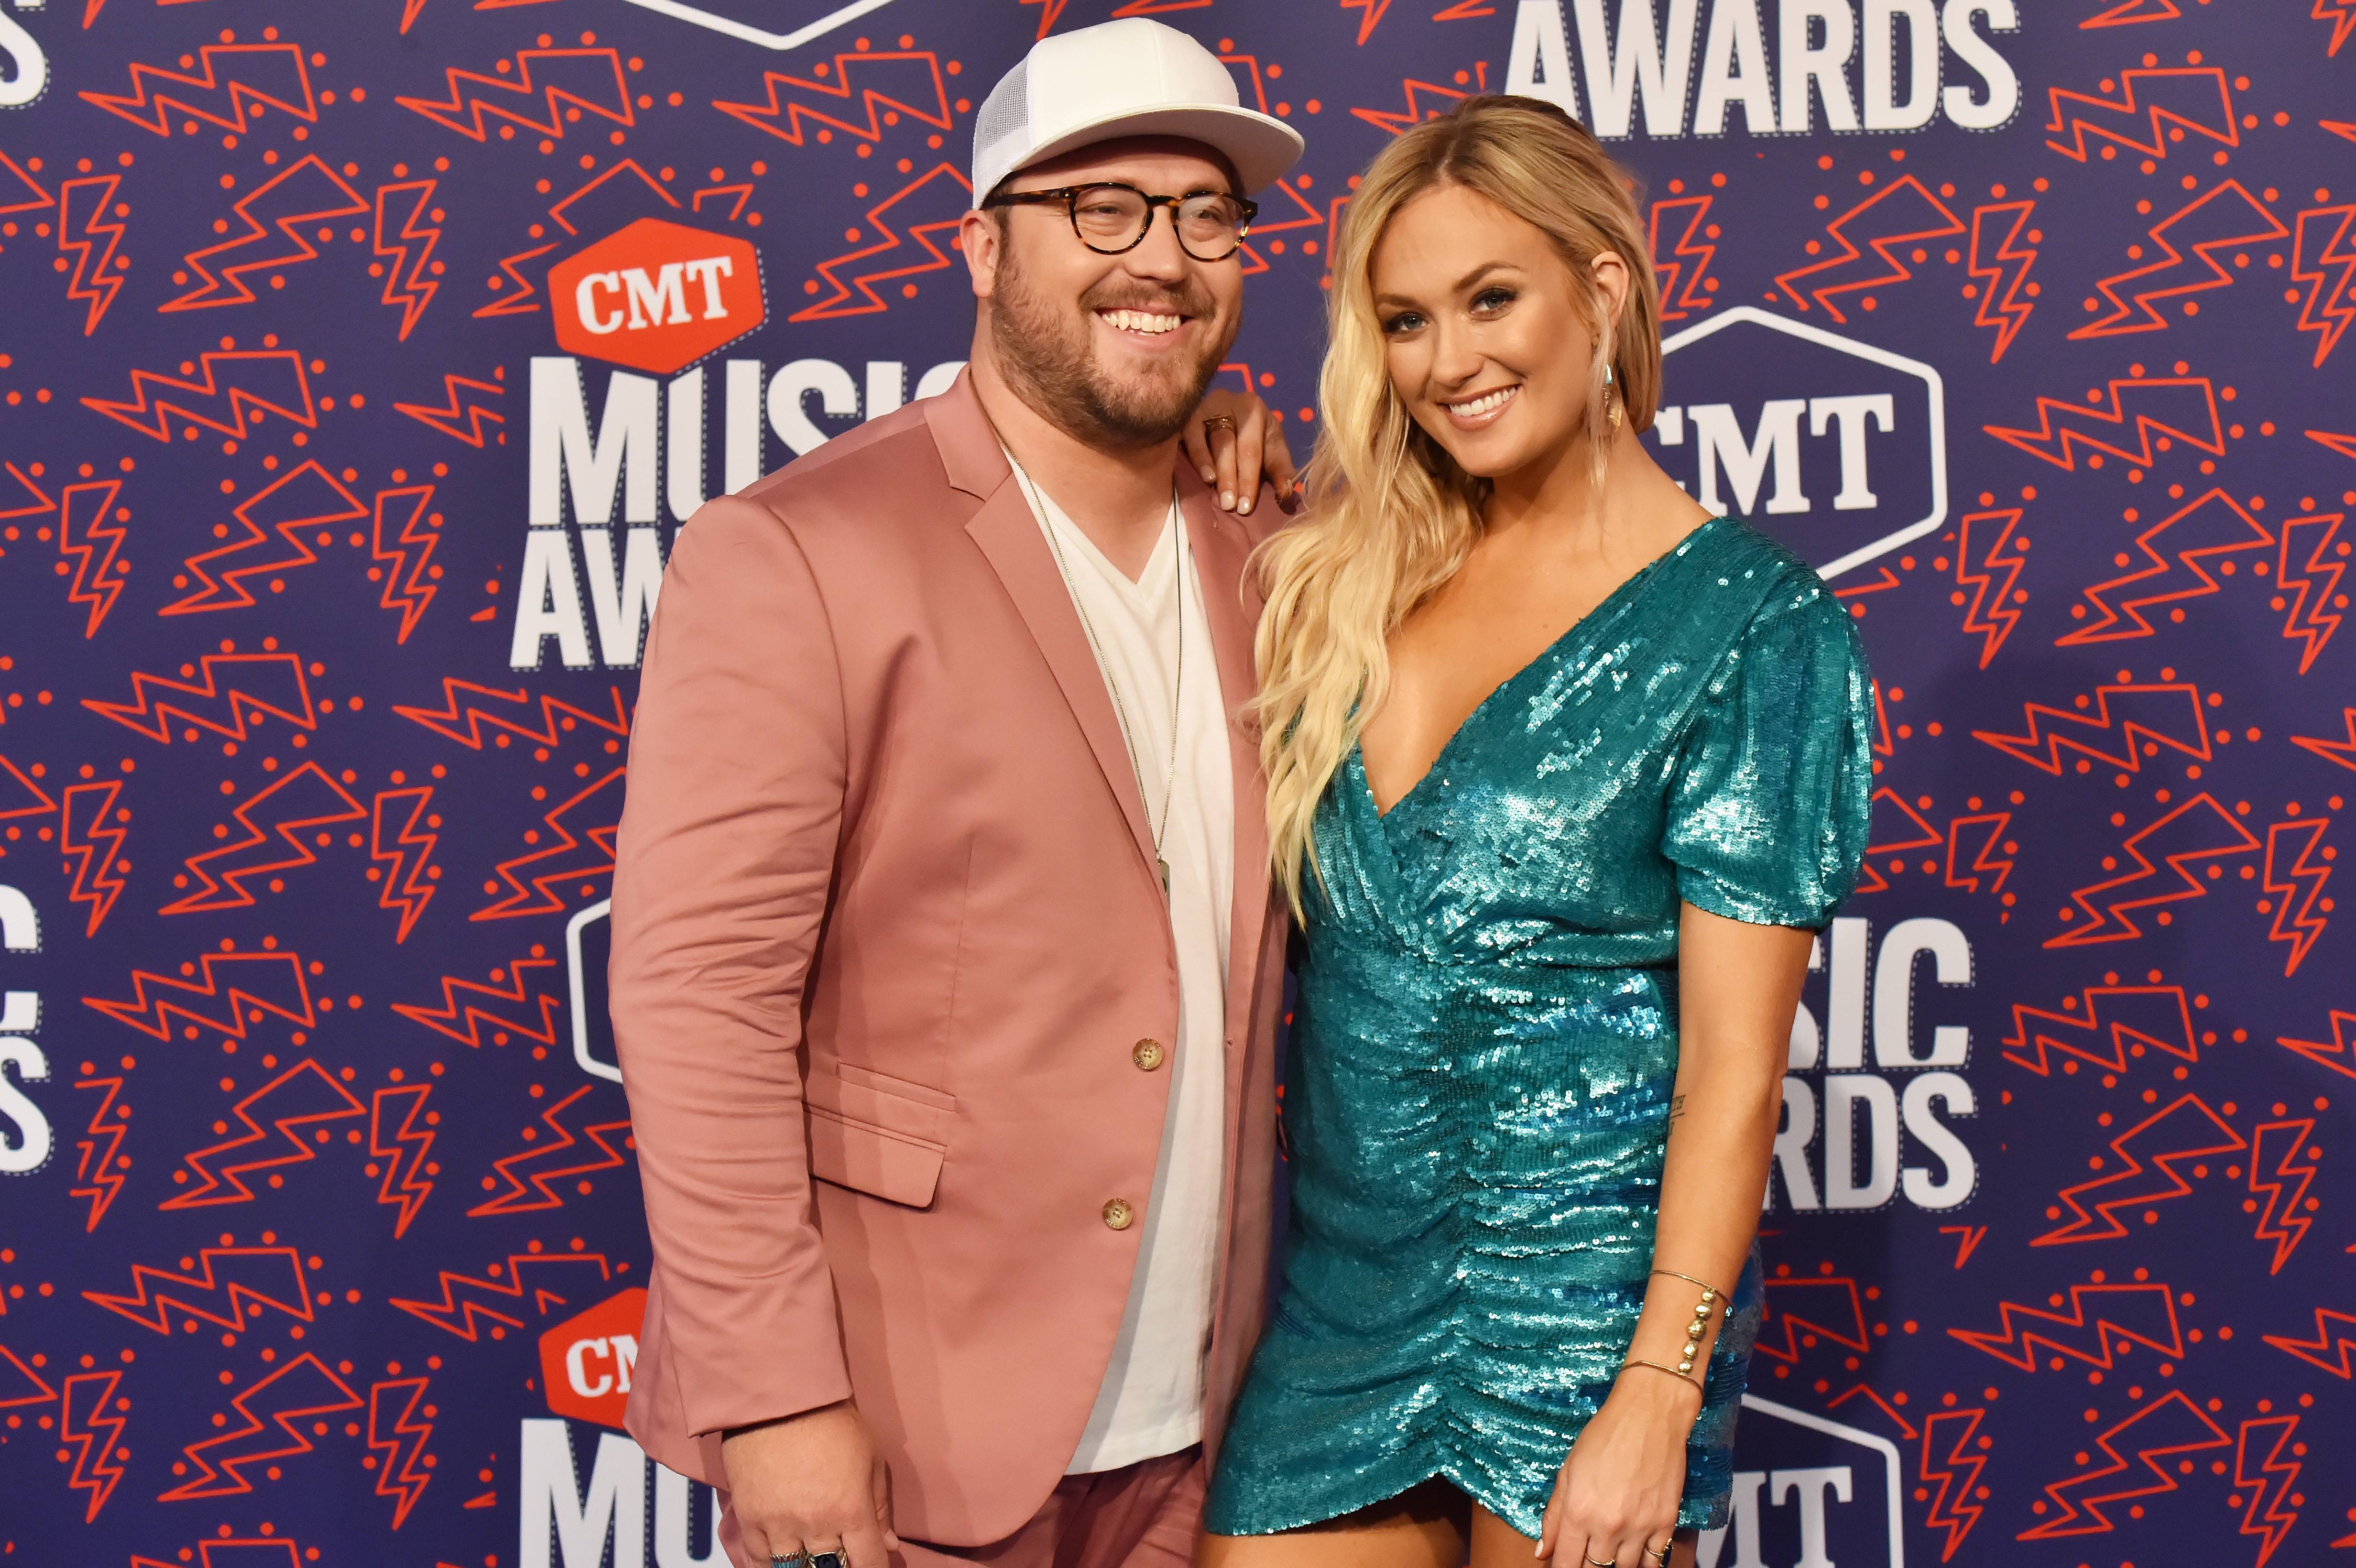 NASHVILLE, TENNESSEE - JUNE 05: Mitchell Tenpenny and Meghan Patrick attend the 2019 CMT Music Awards at Bridgestone Arena on June 05, 2019 in Nashville, Tennessee.